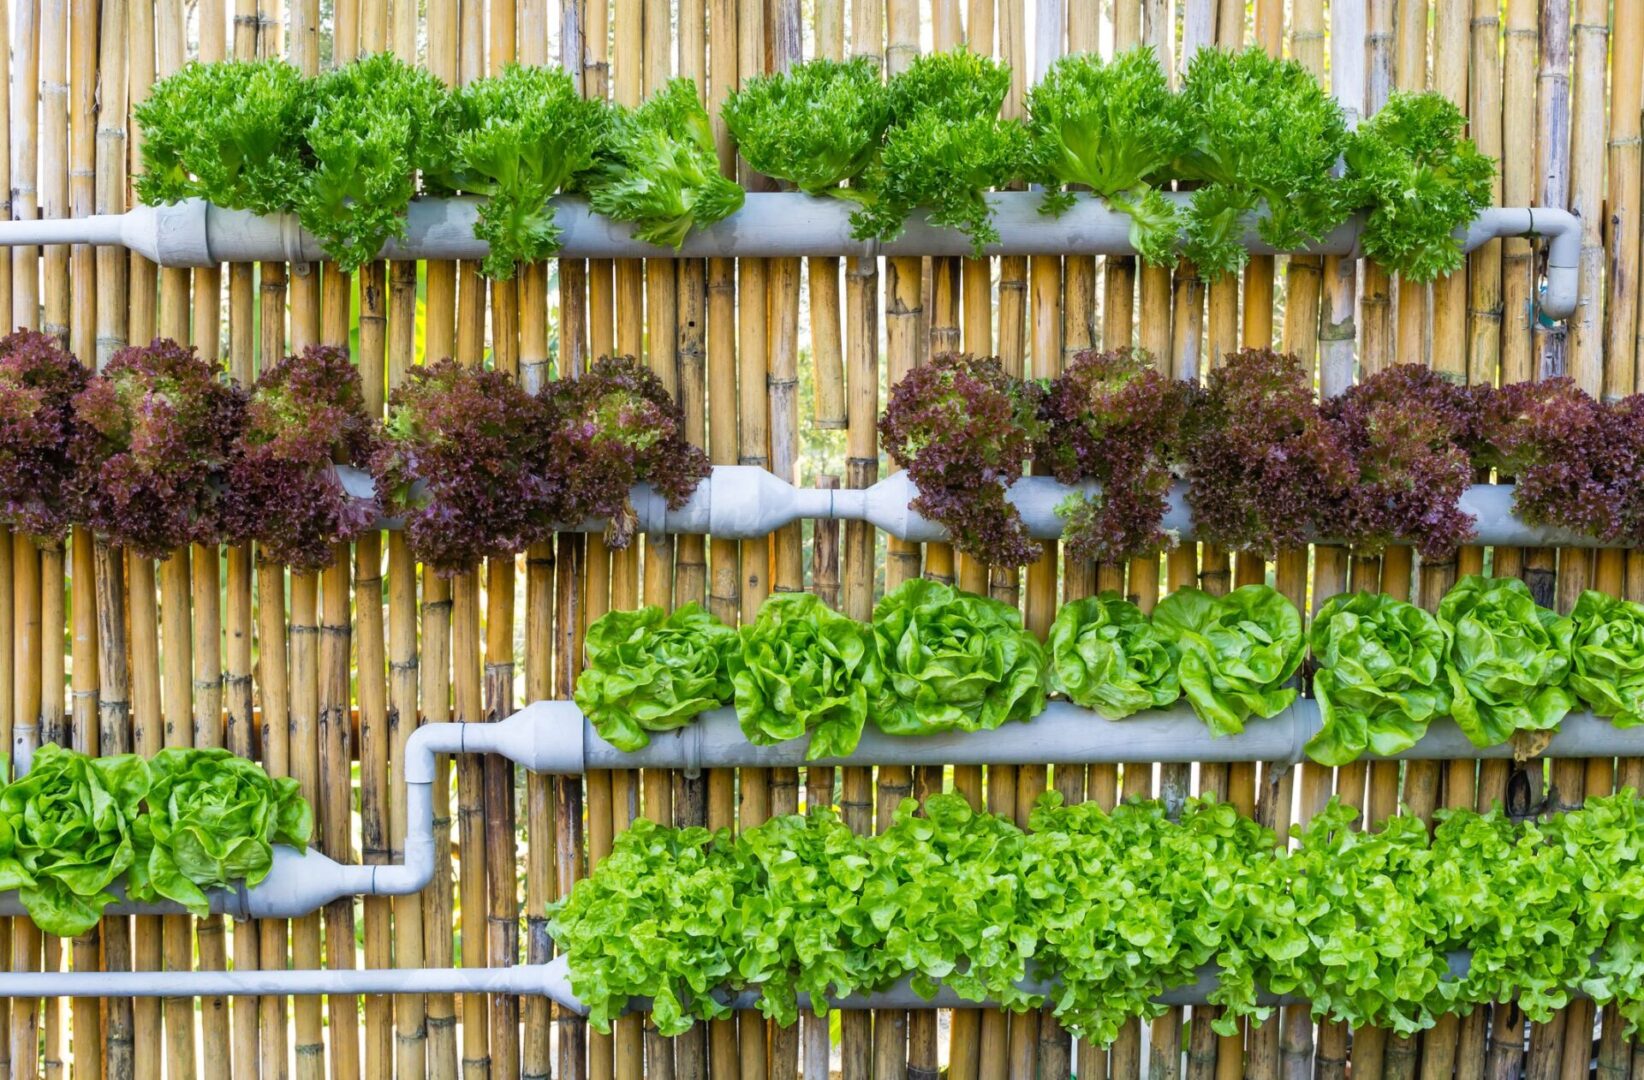 A wall of lettuce growing on bamboo poles.